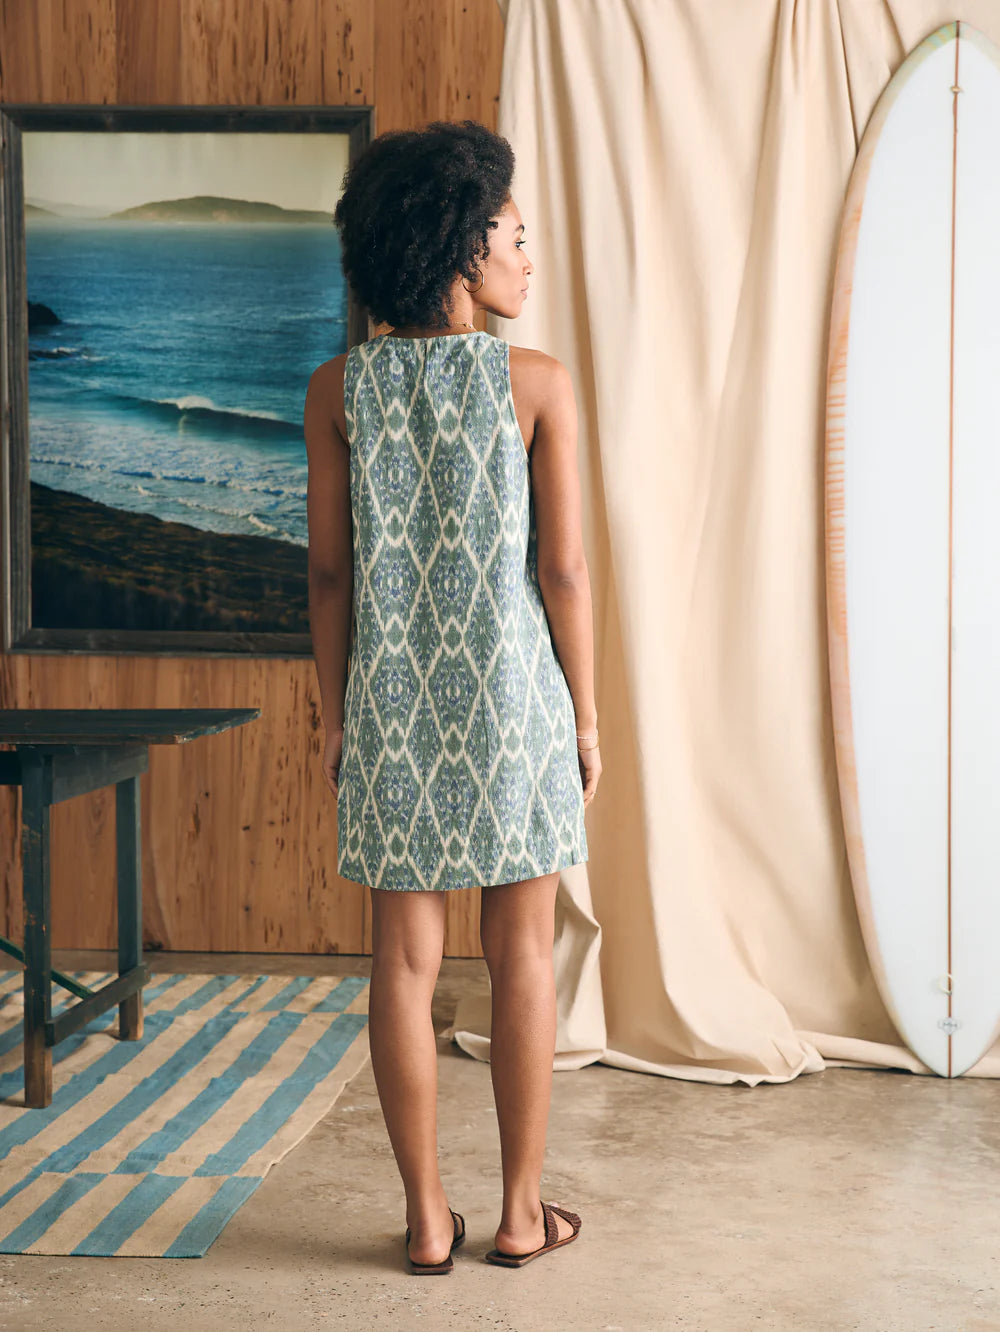 Back view of Faherty's Carini Dress in the pattern Tuscan Ikat